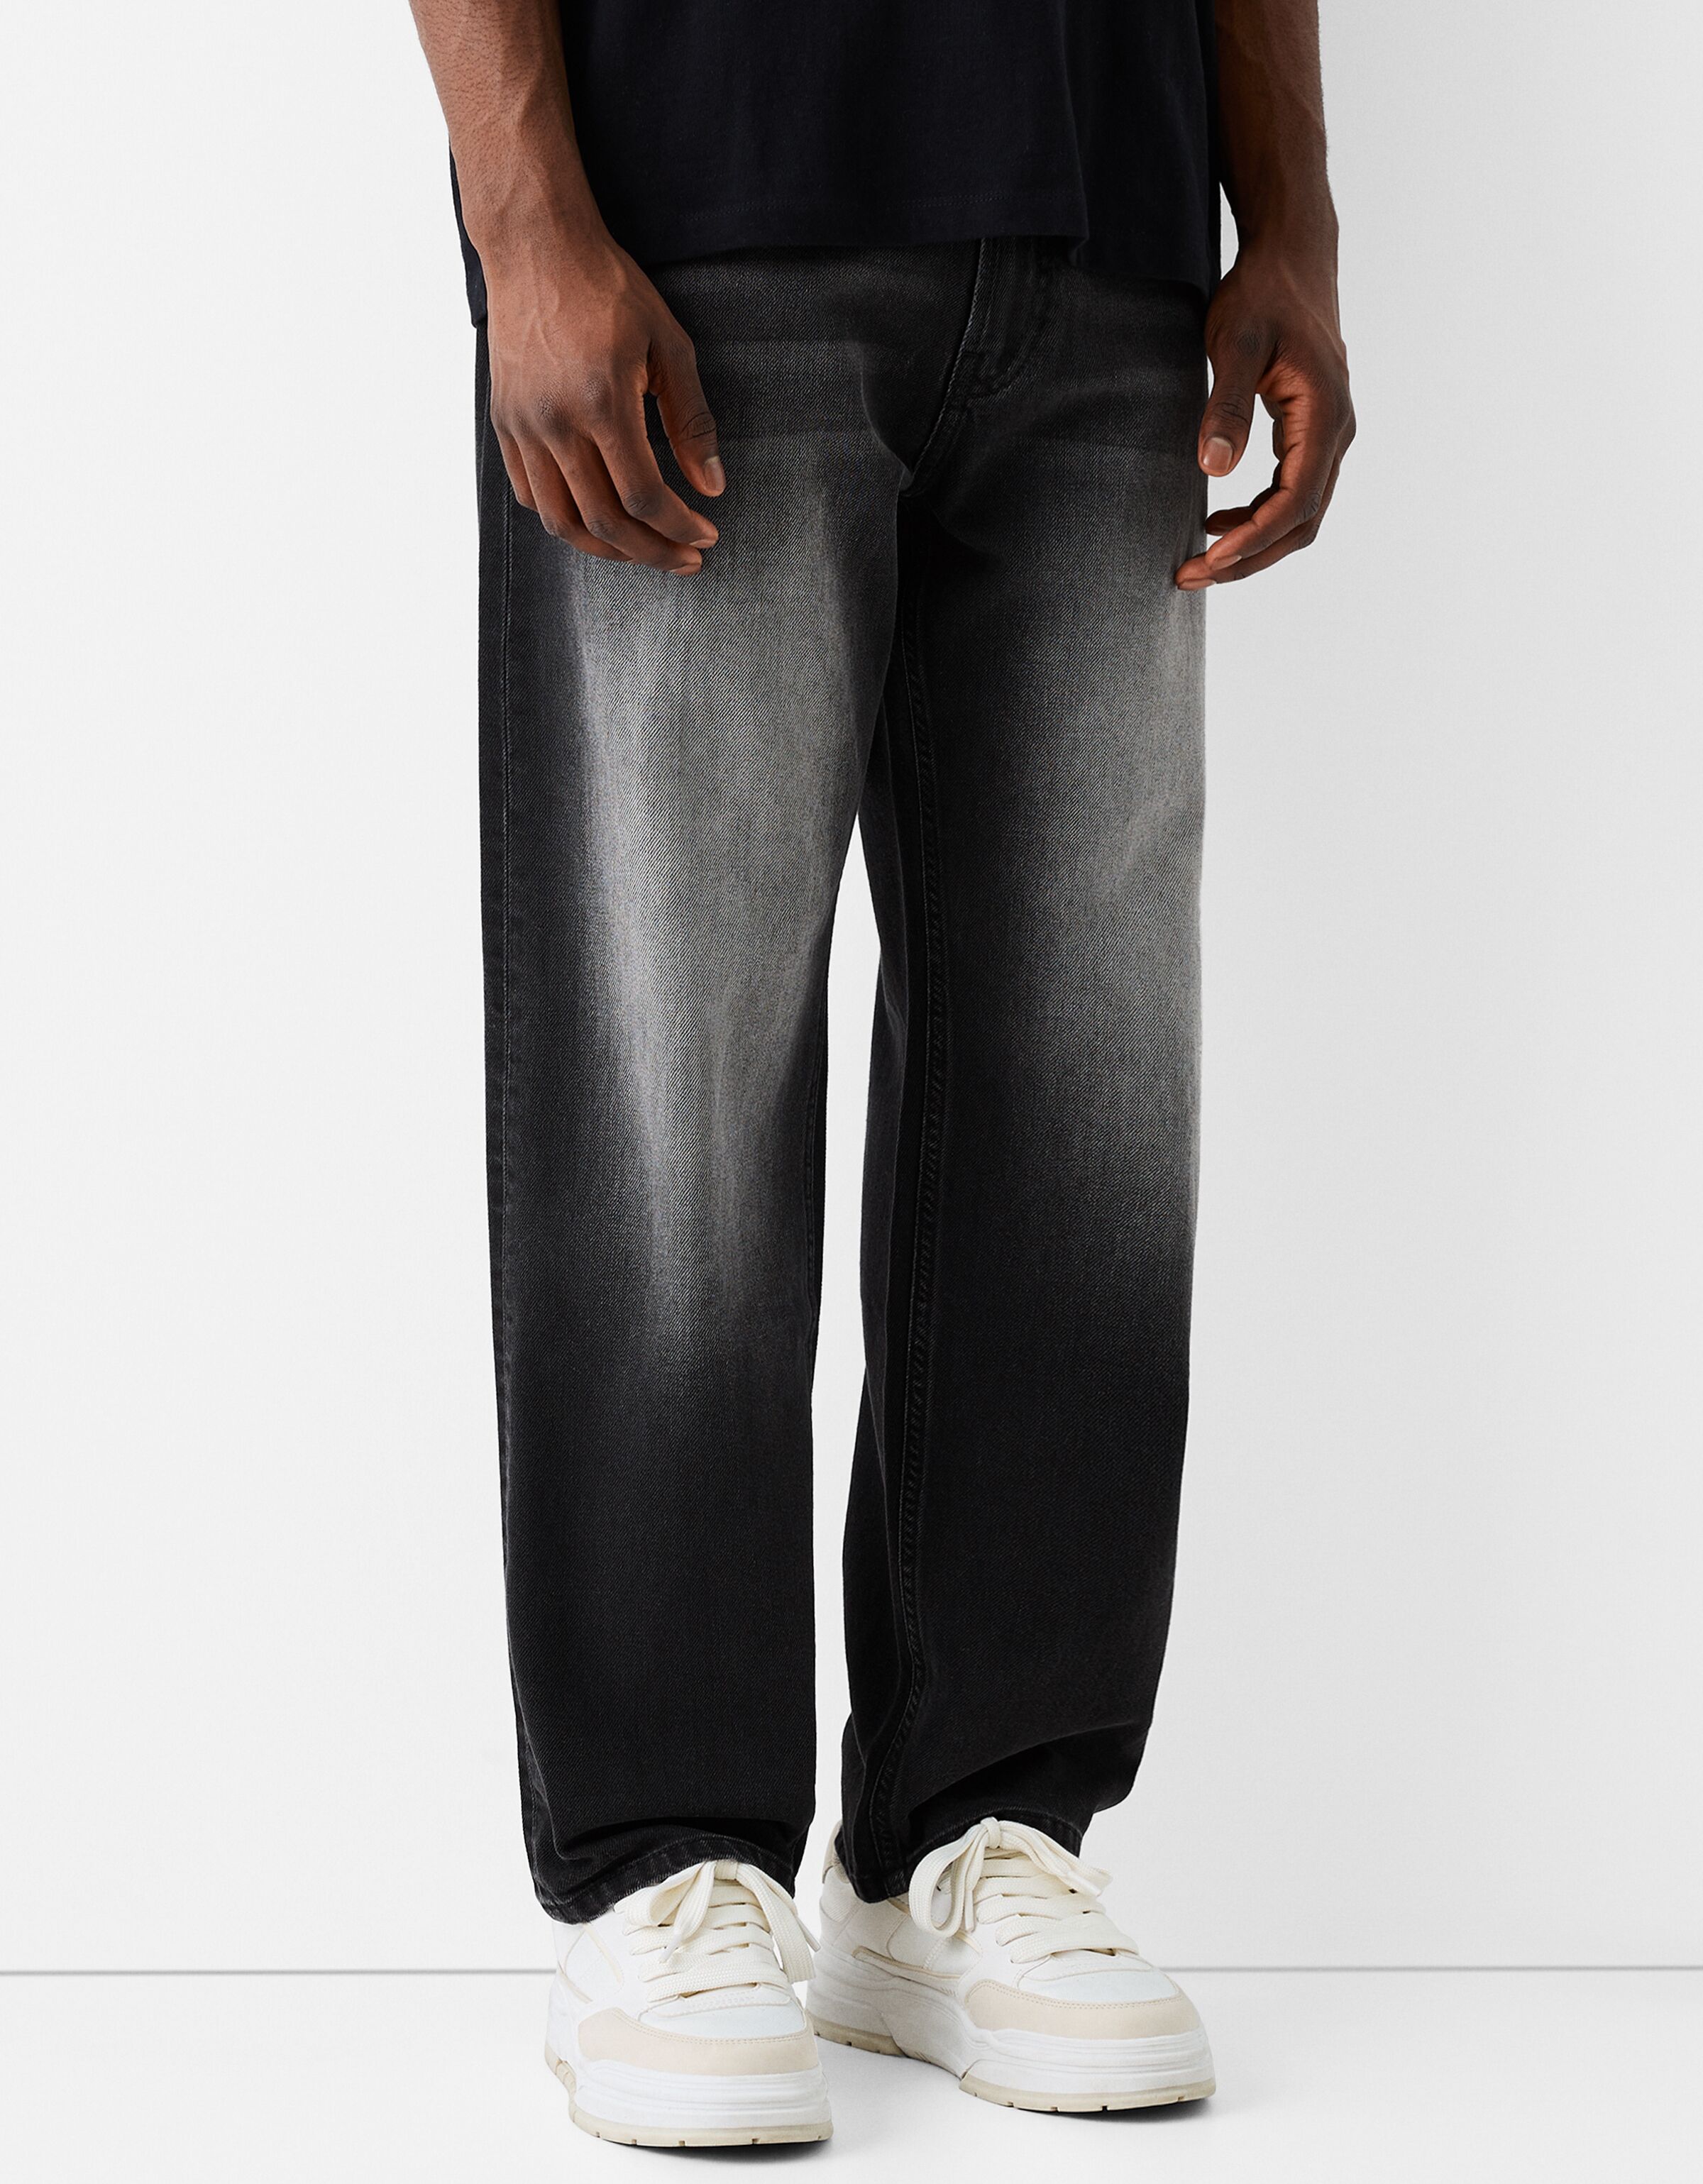 BDG Willow 90s Baggy Pant | Urban Outfitters